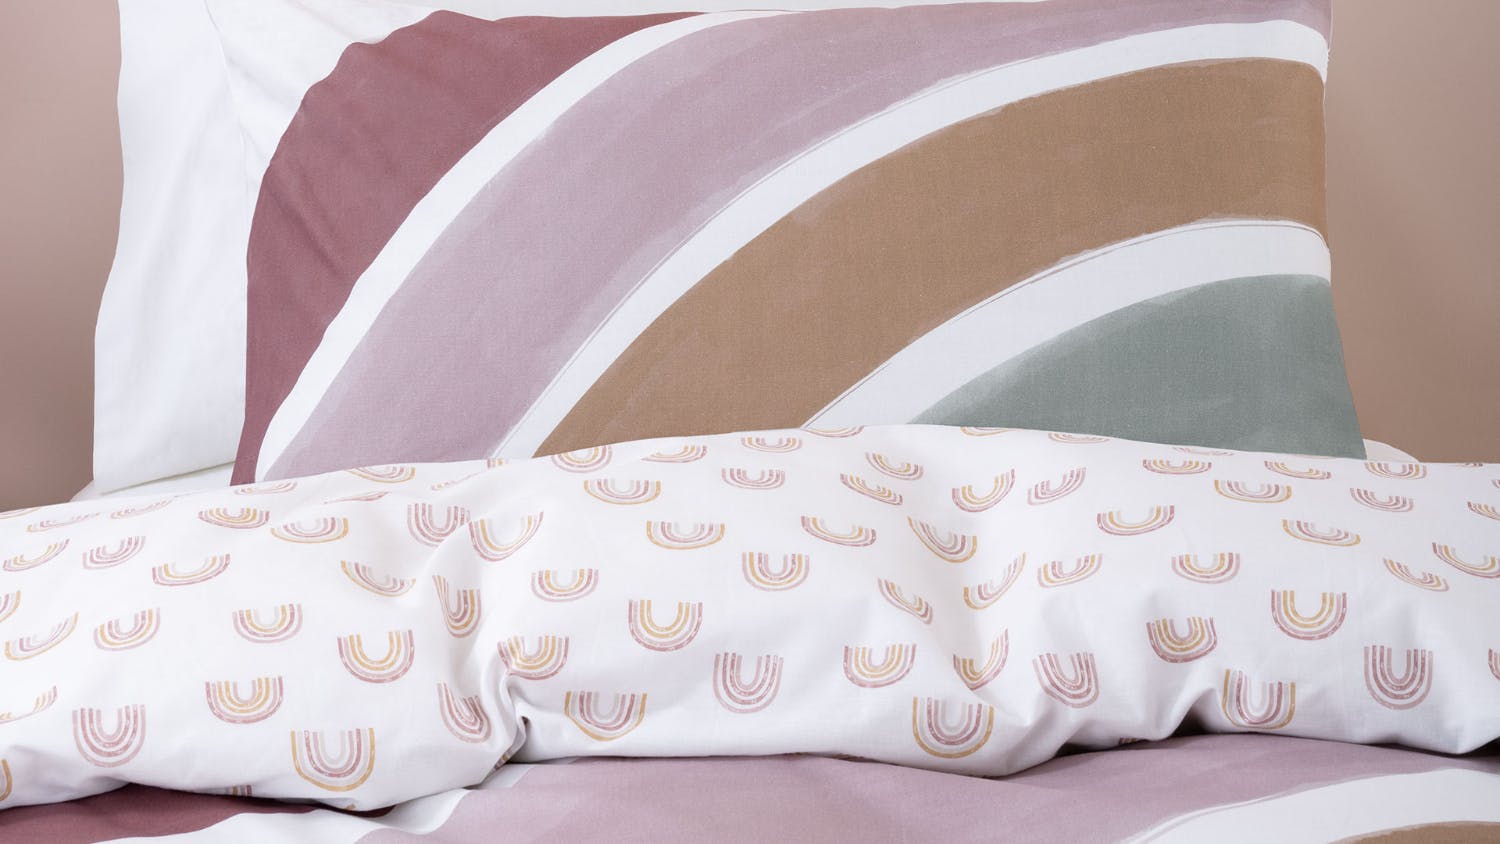 Rainbow Days Duvet Cover Set by Squiggles